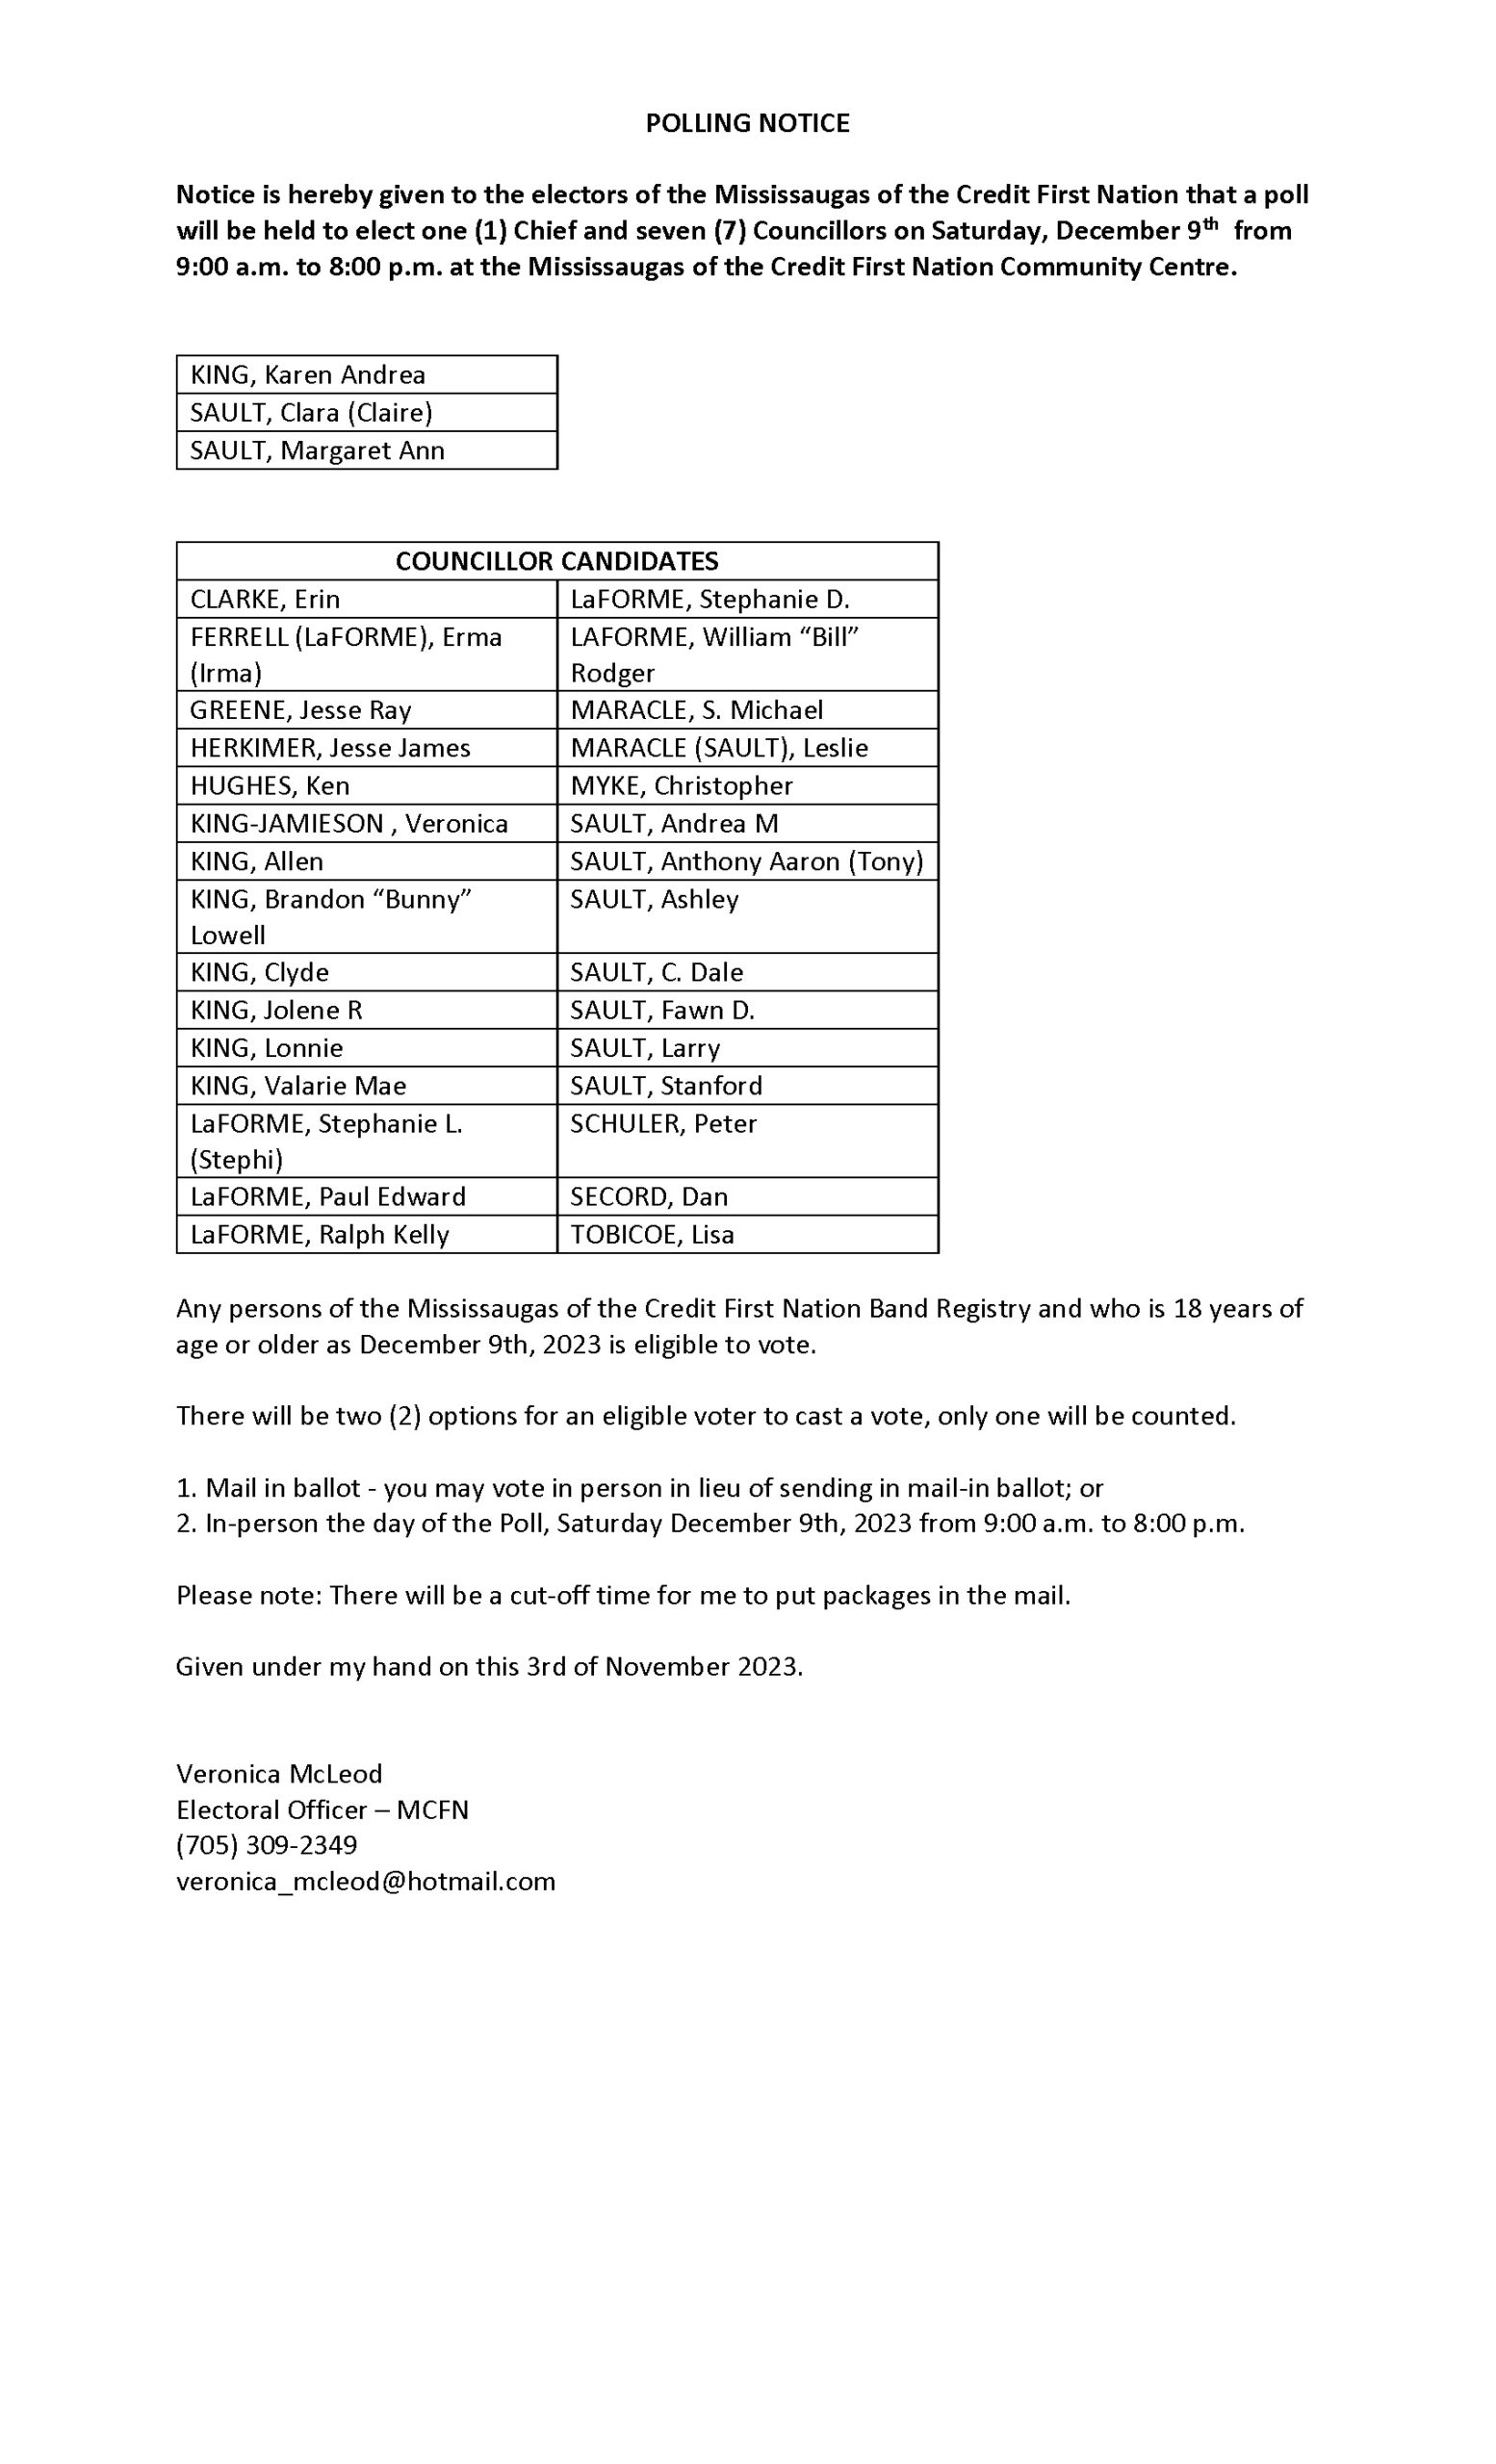 Final List of Candidates for the 2023 Mississaugas of the Credit First Nation General Election